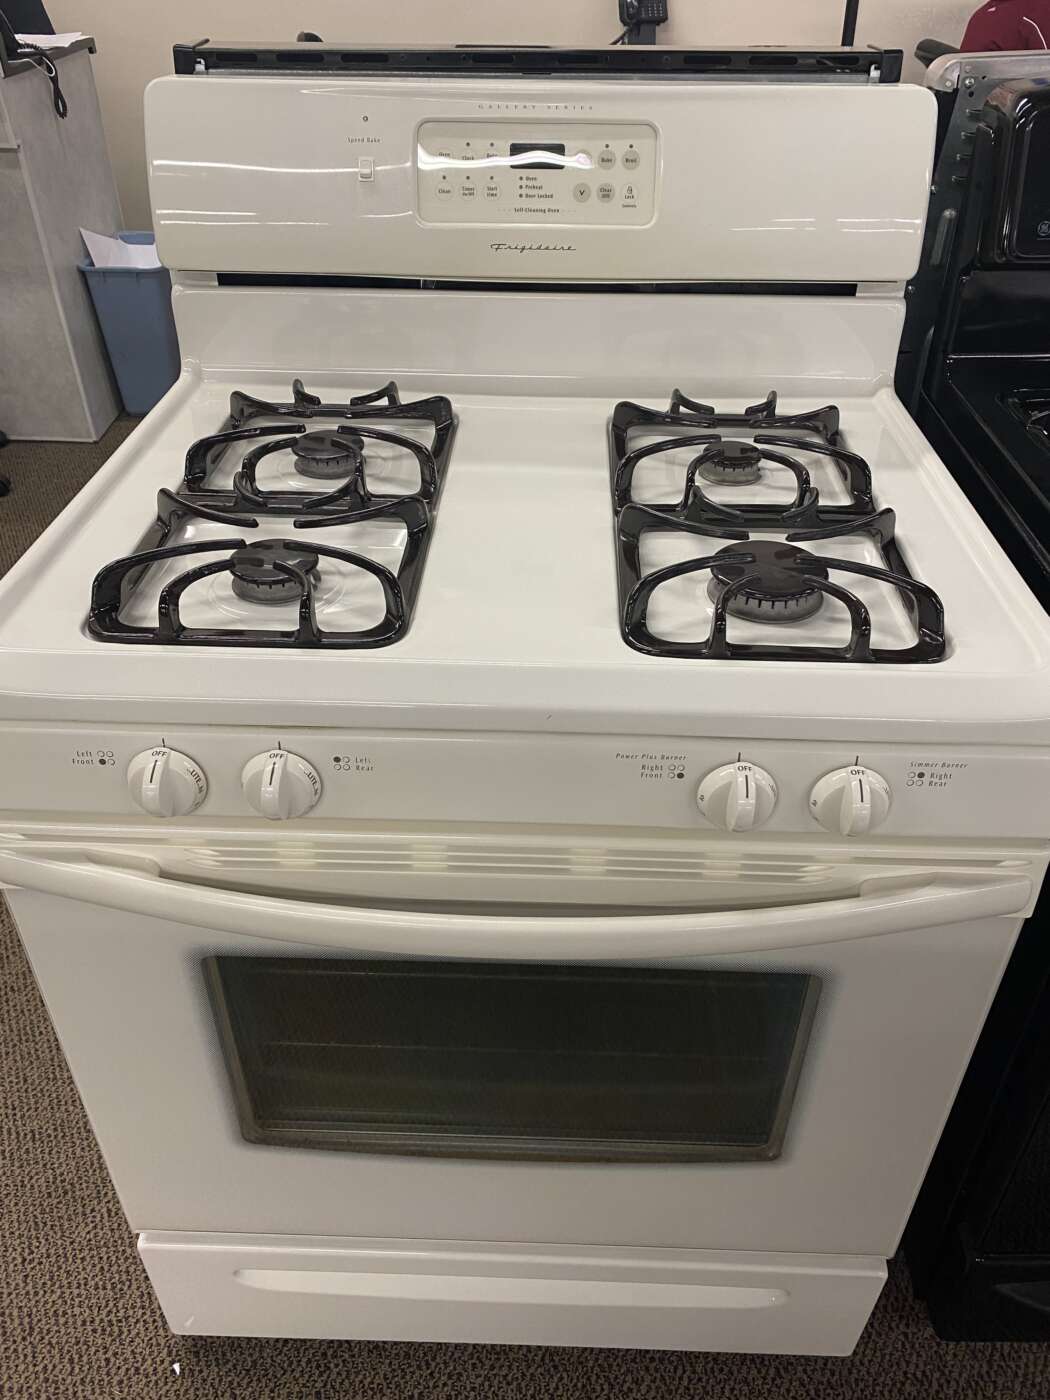 Reconditioned FRIGIDAIRE 5.0 Cu. Ft. Gas Range With Self Clean